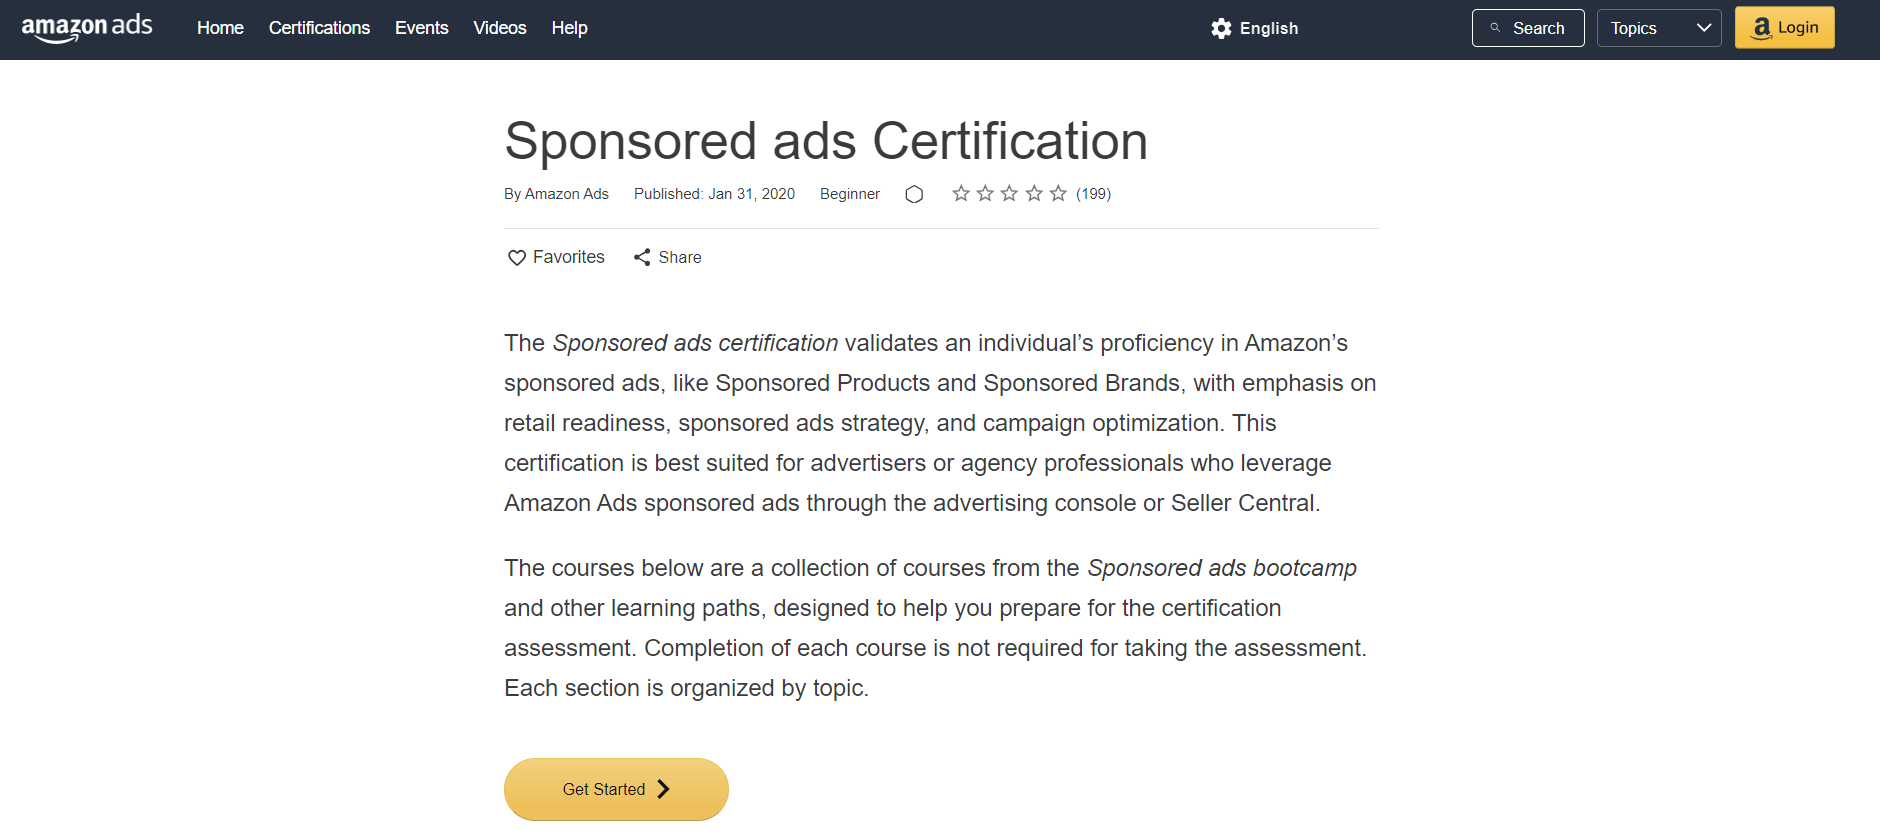 Amazon Sponsored Ads Certifications by Amazon